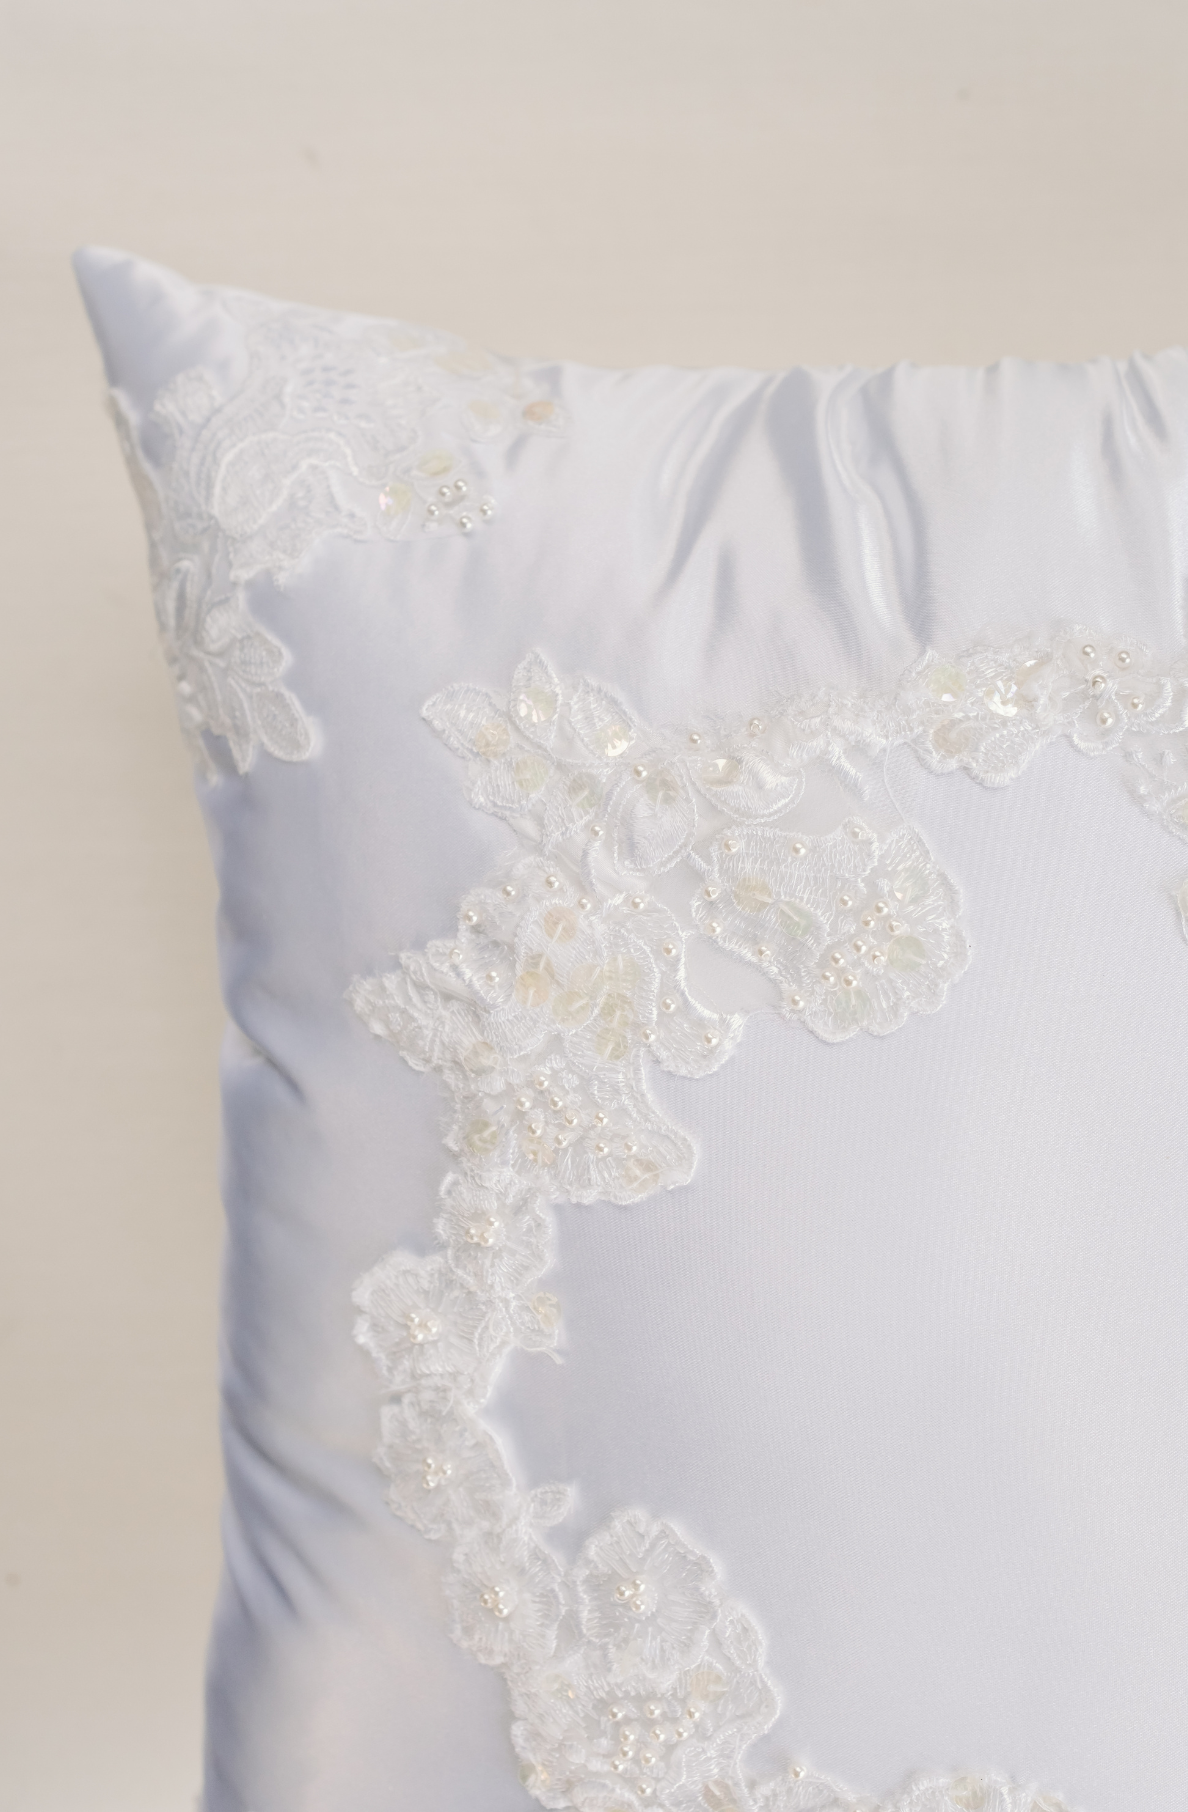 Exclusive Deal Wedding Dress Made Into a Square Pillow